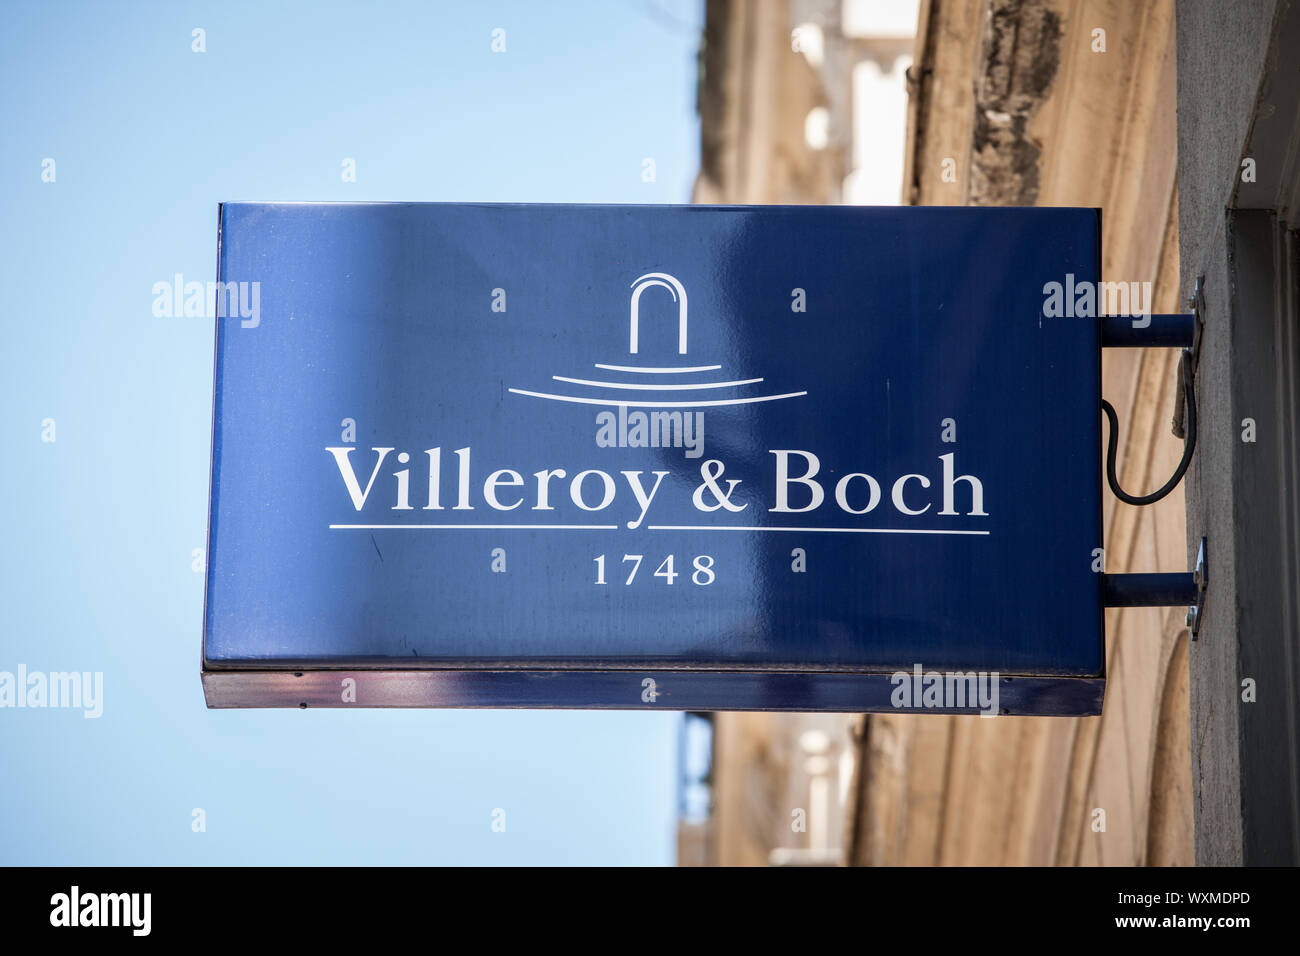 LYON, FRANCE - JULY 14, 2019: Villeroy & Boch logo in front of their store in Lyon. Villeroy & Boch is a German manufacturer and retailer of ceramics Stock Photo